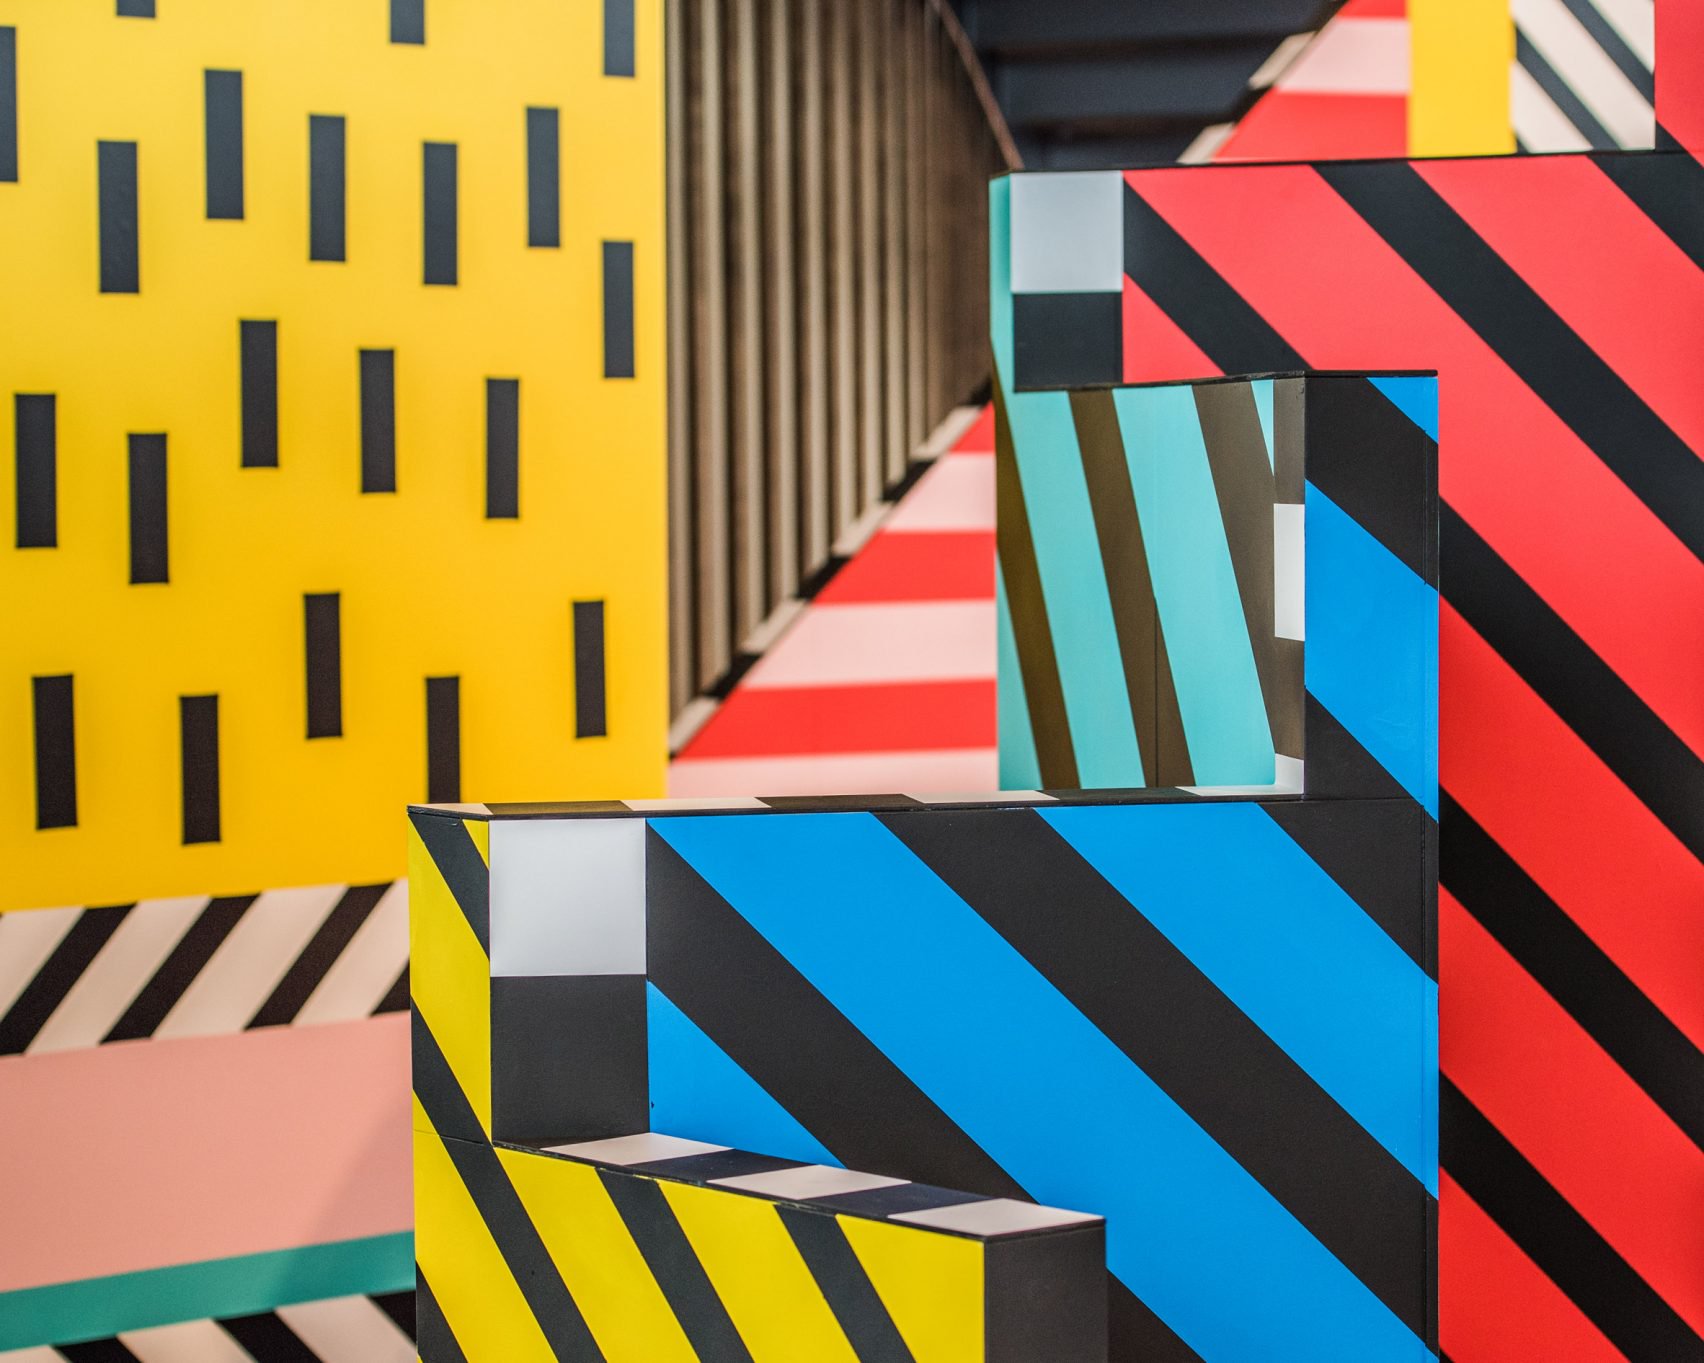 camille-walala-play-installation-now-gallery-london_dezeen_2364_col_16-1704x1363